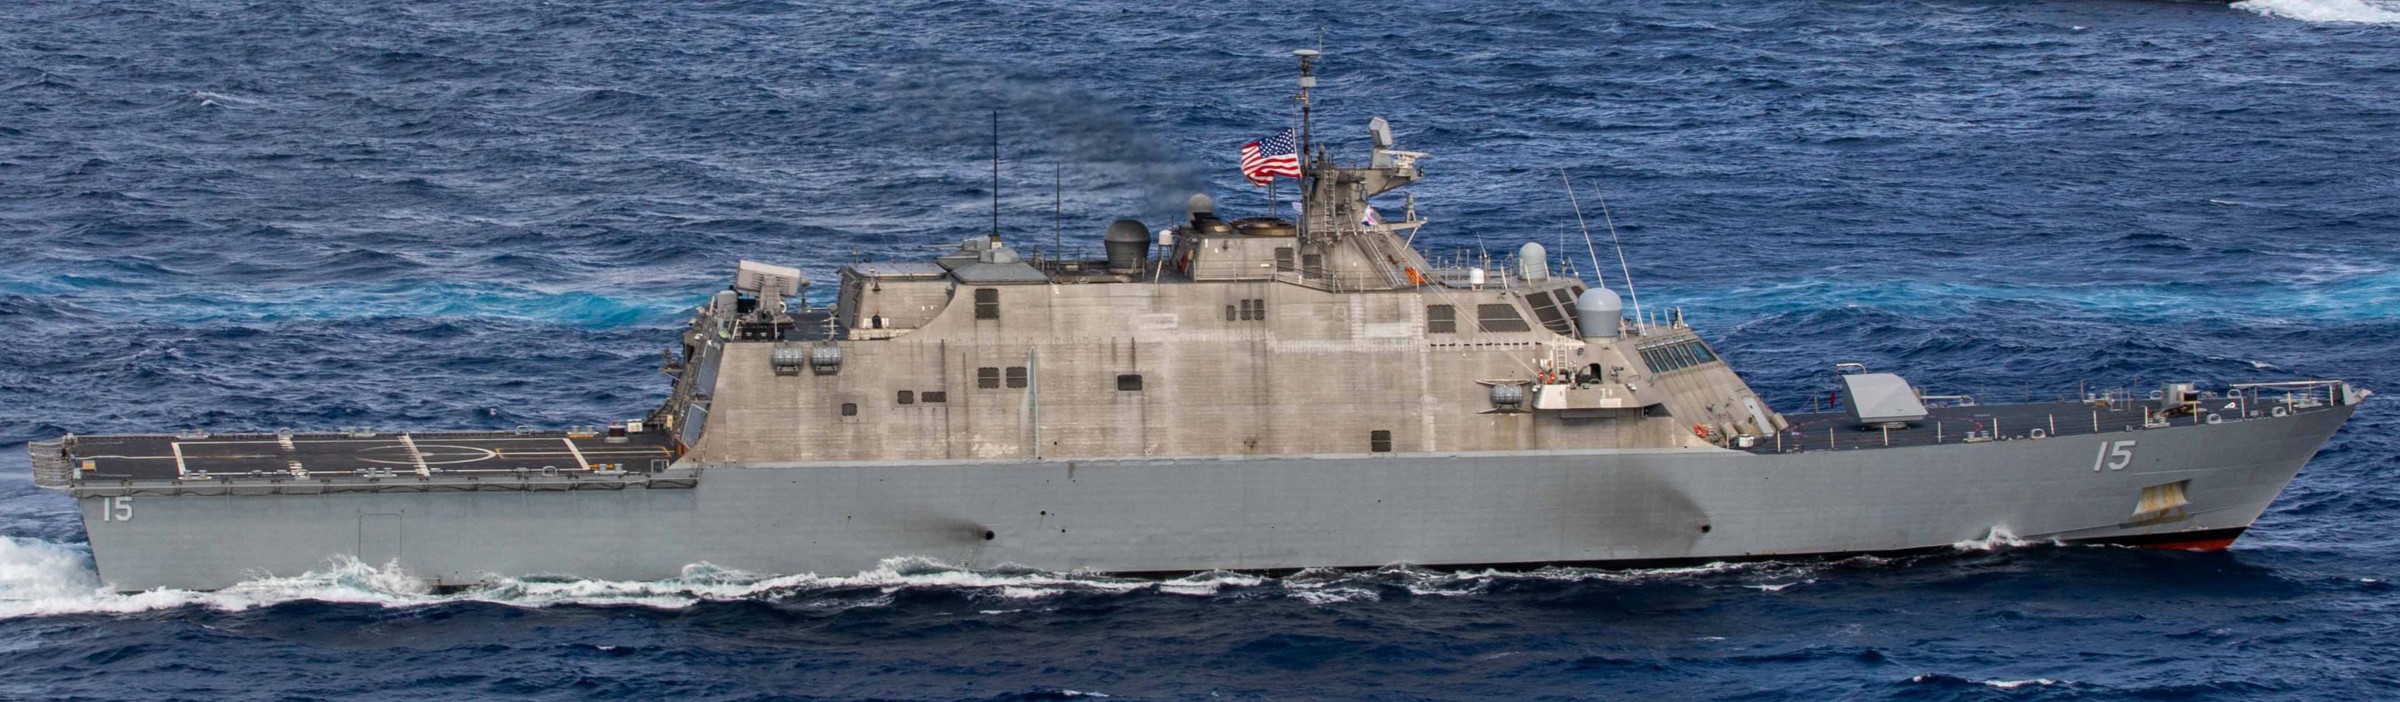 lcs-15 uss billings freedom class littoral combat ship us navy 69